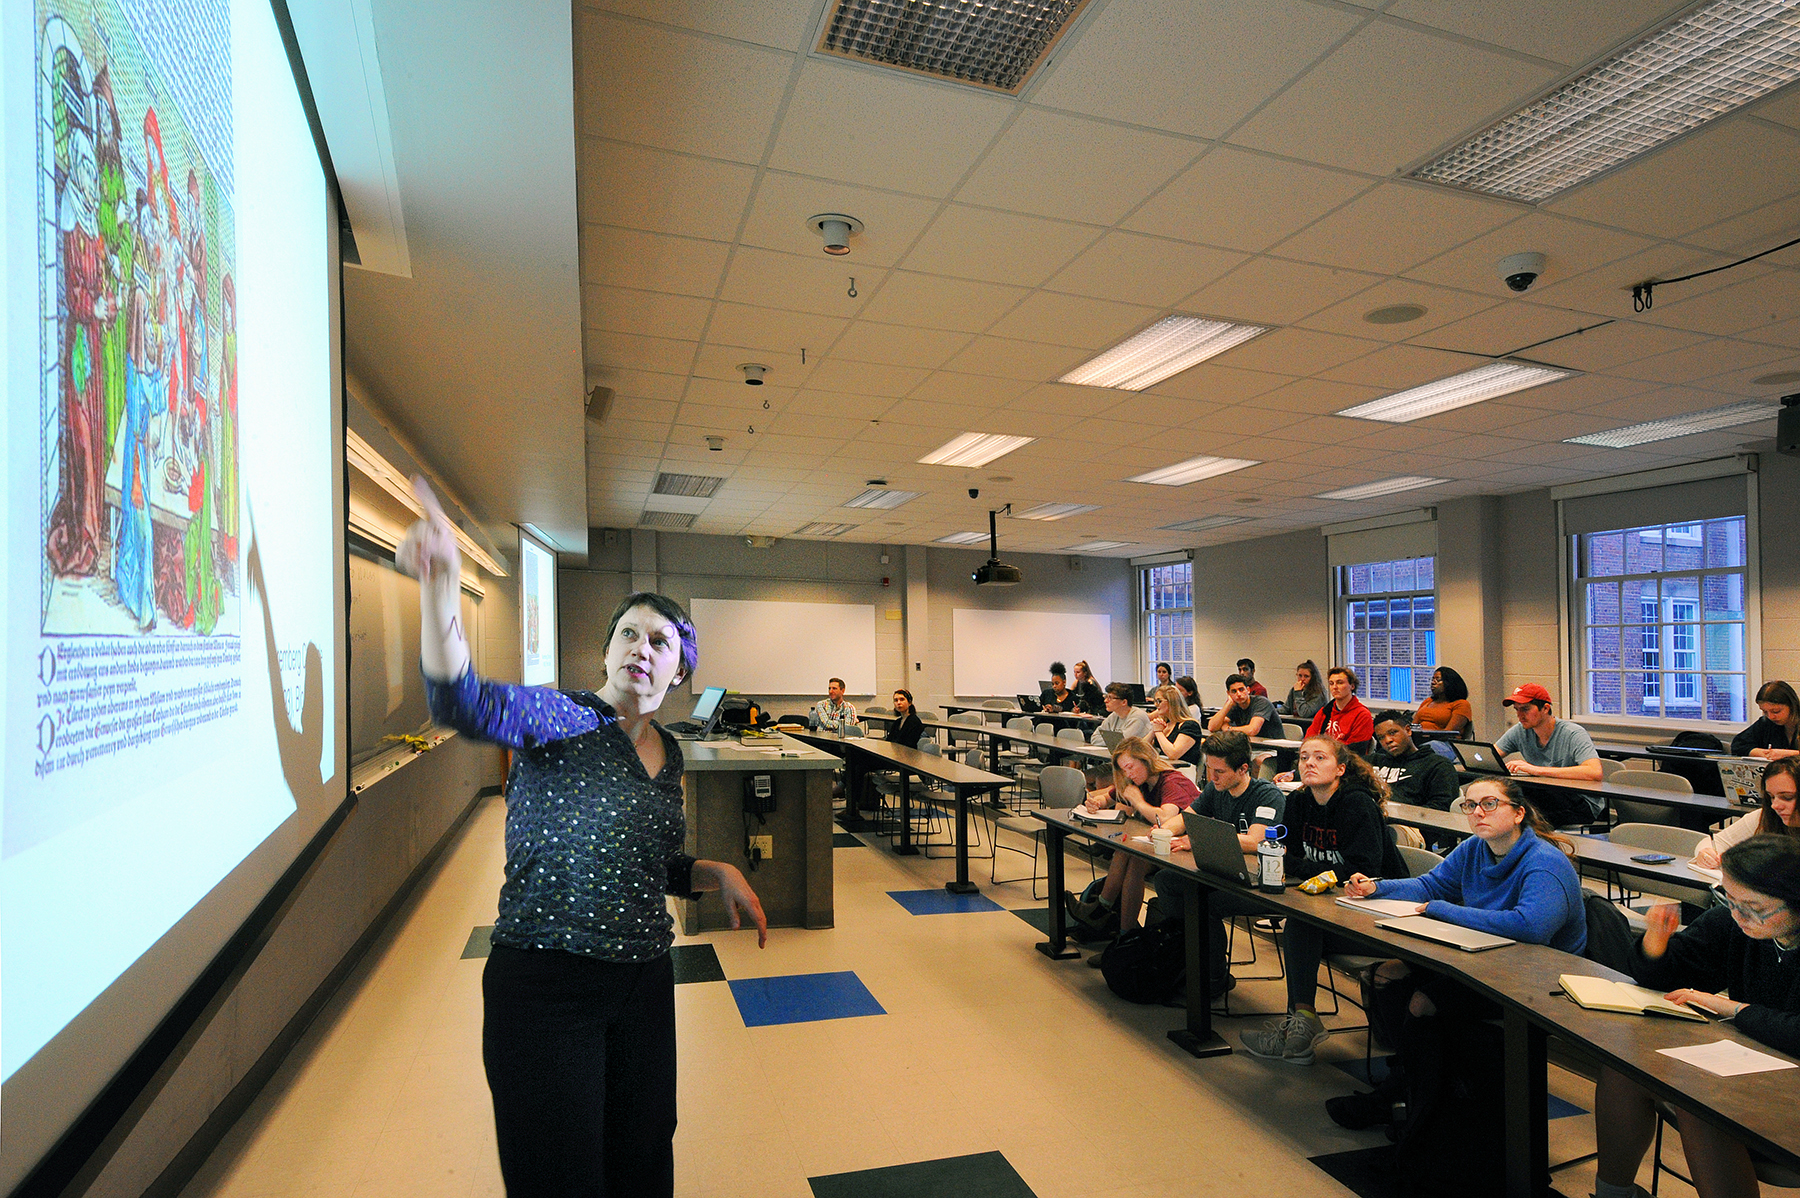 Ruth von Bernuth, director of the Carolina Center for Jewish Studies, delivers a guest lecture in the "Confronting Antisemitism" course. (photo by Donn Young)